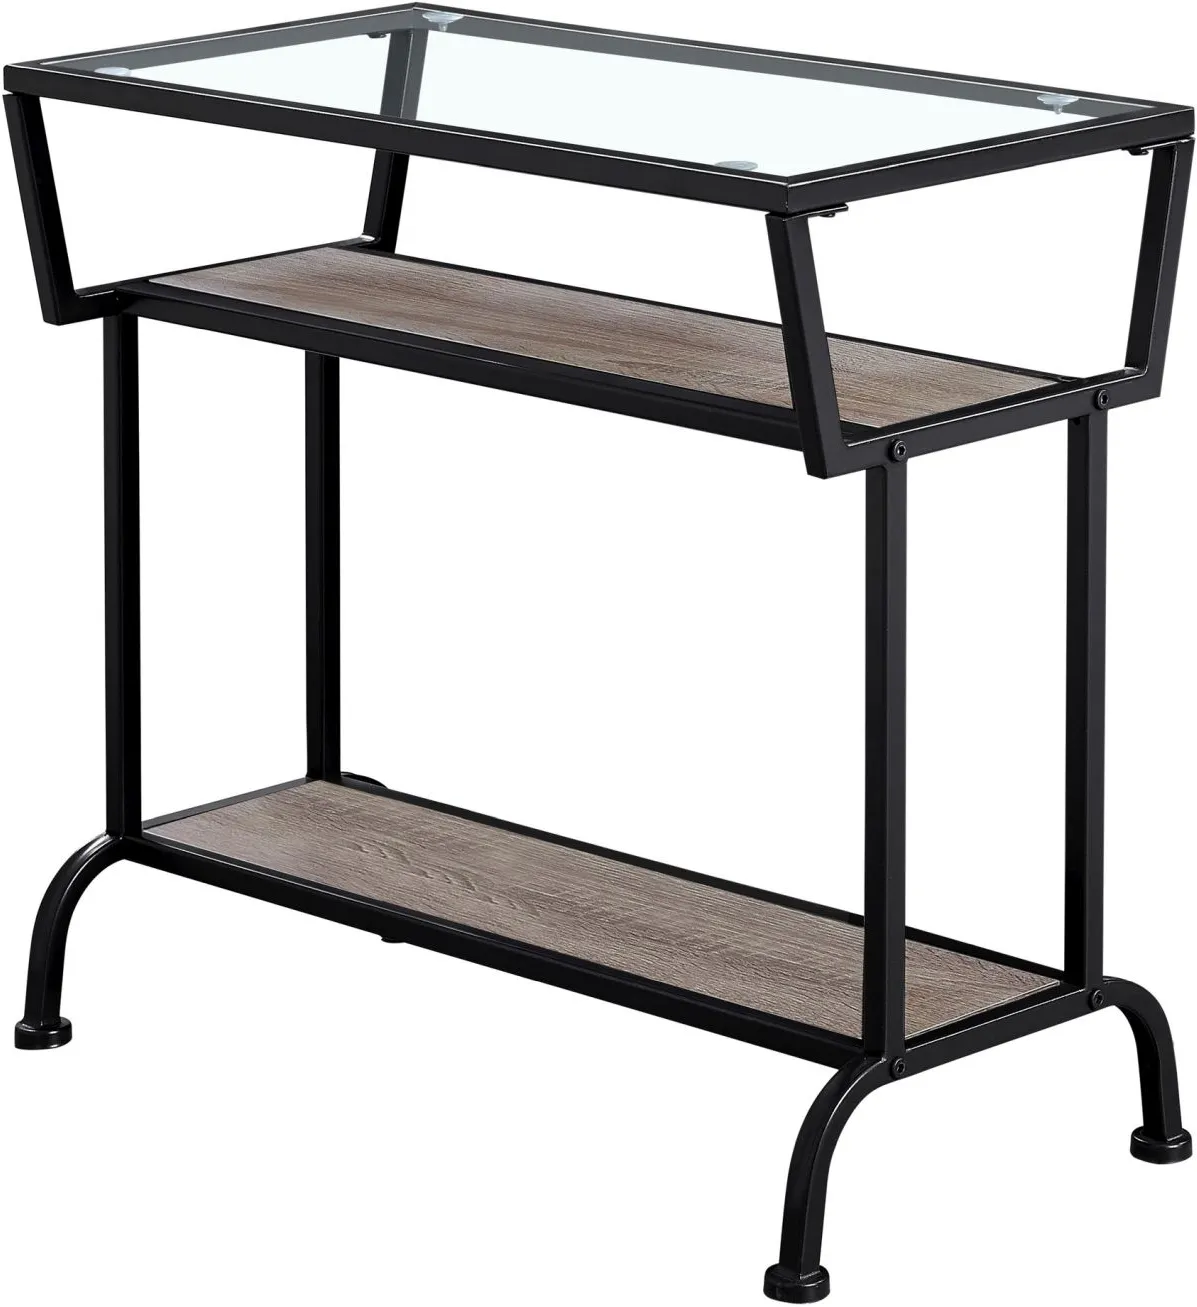 Accent Table, Side, End, Narrow, Small, 2 Tier, Living Room, Bedroom, Metal, Tempered Glass, Laminate, Brown, Black, Contemporary, Modern